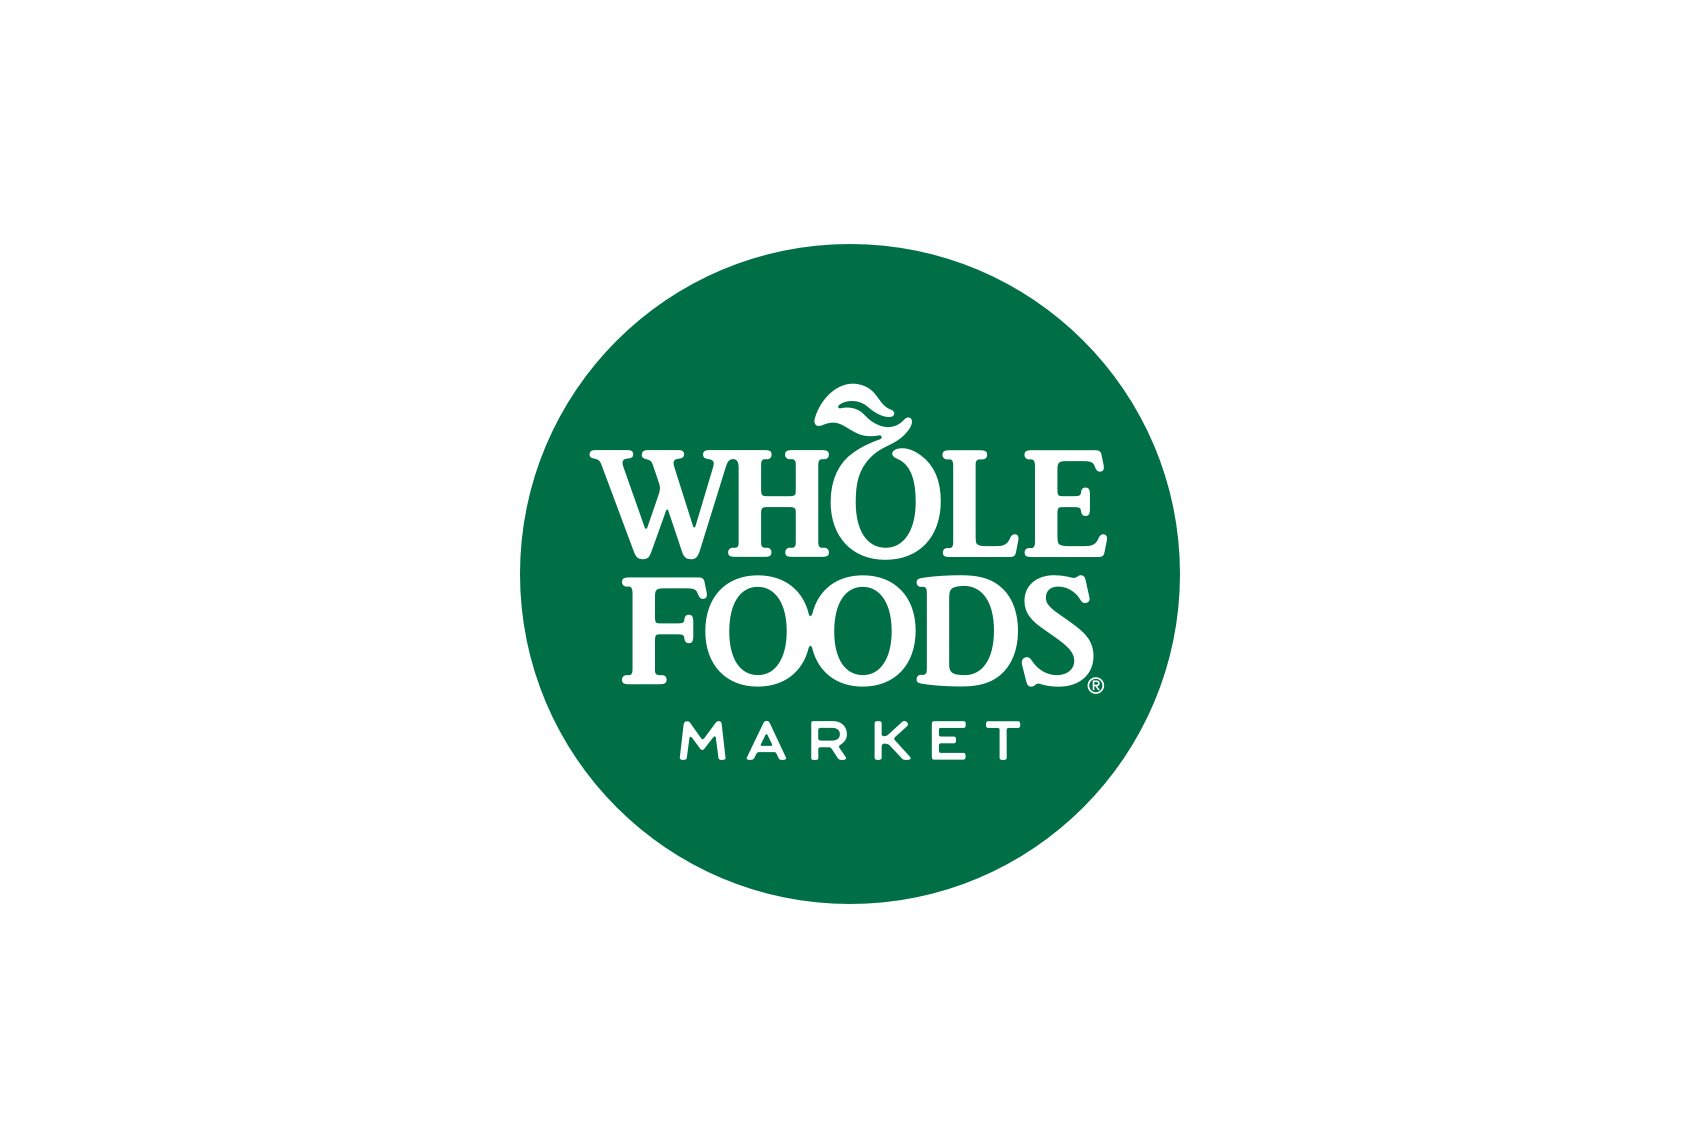 handcrafted-logo-whole-foods-market